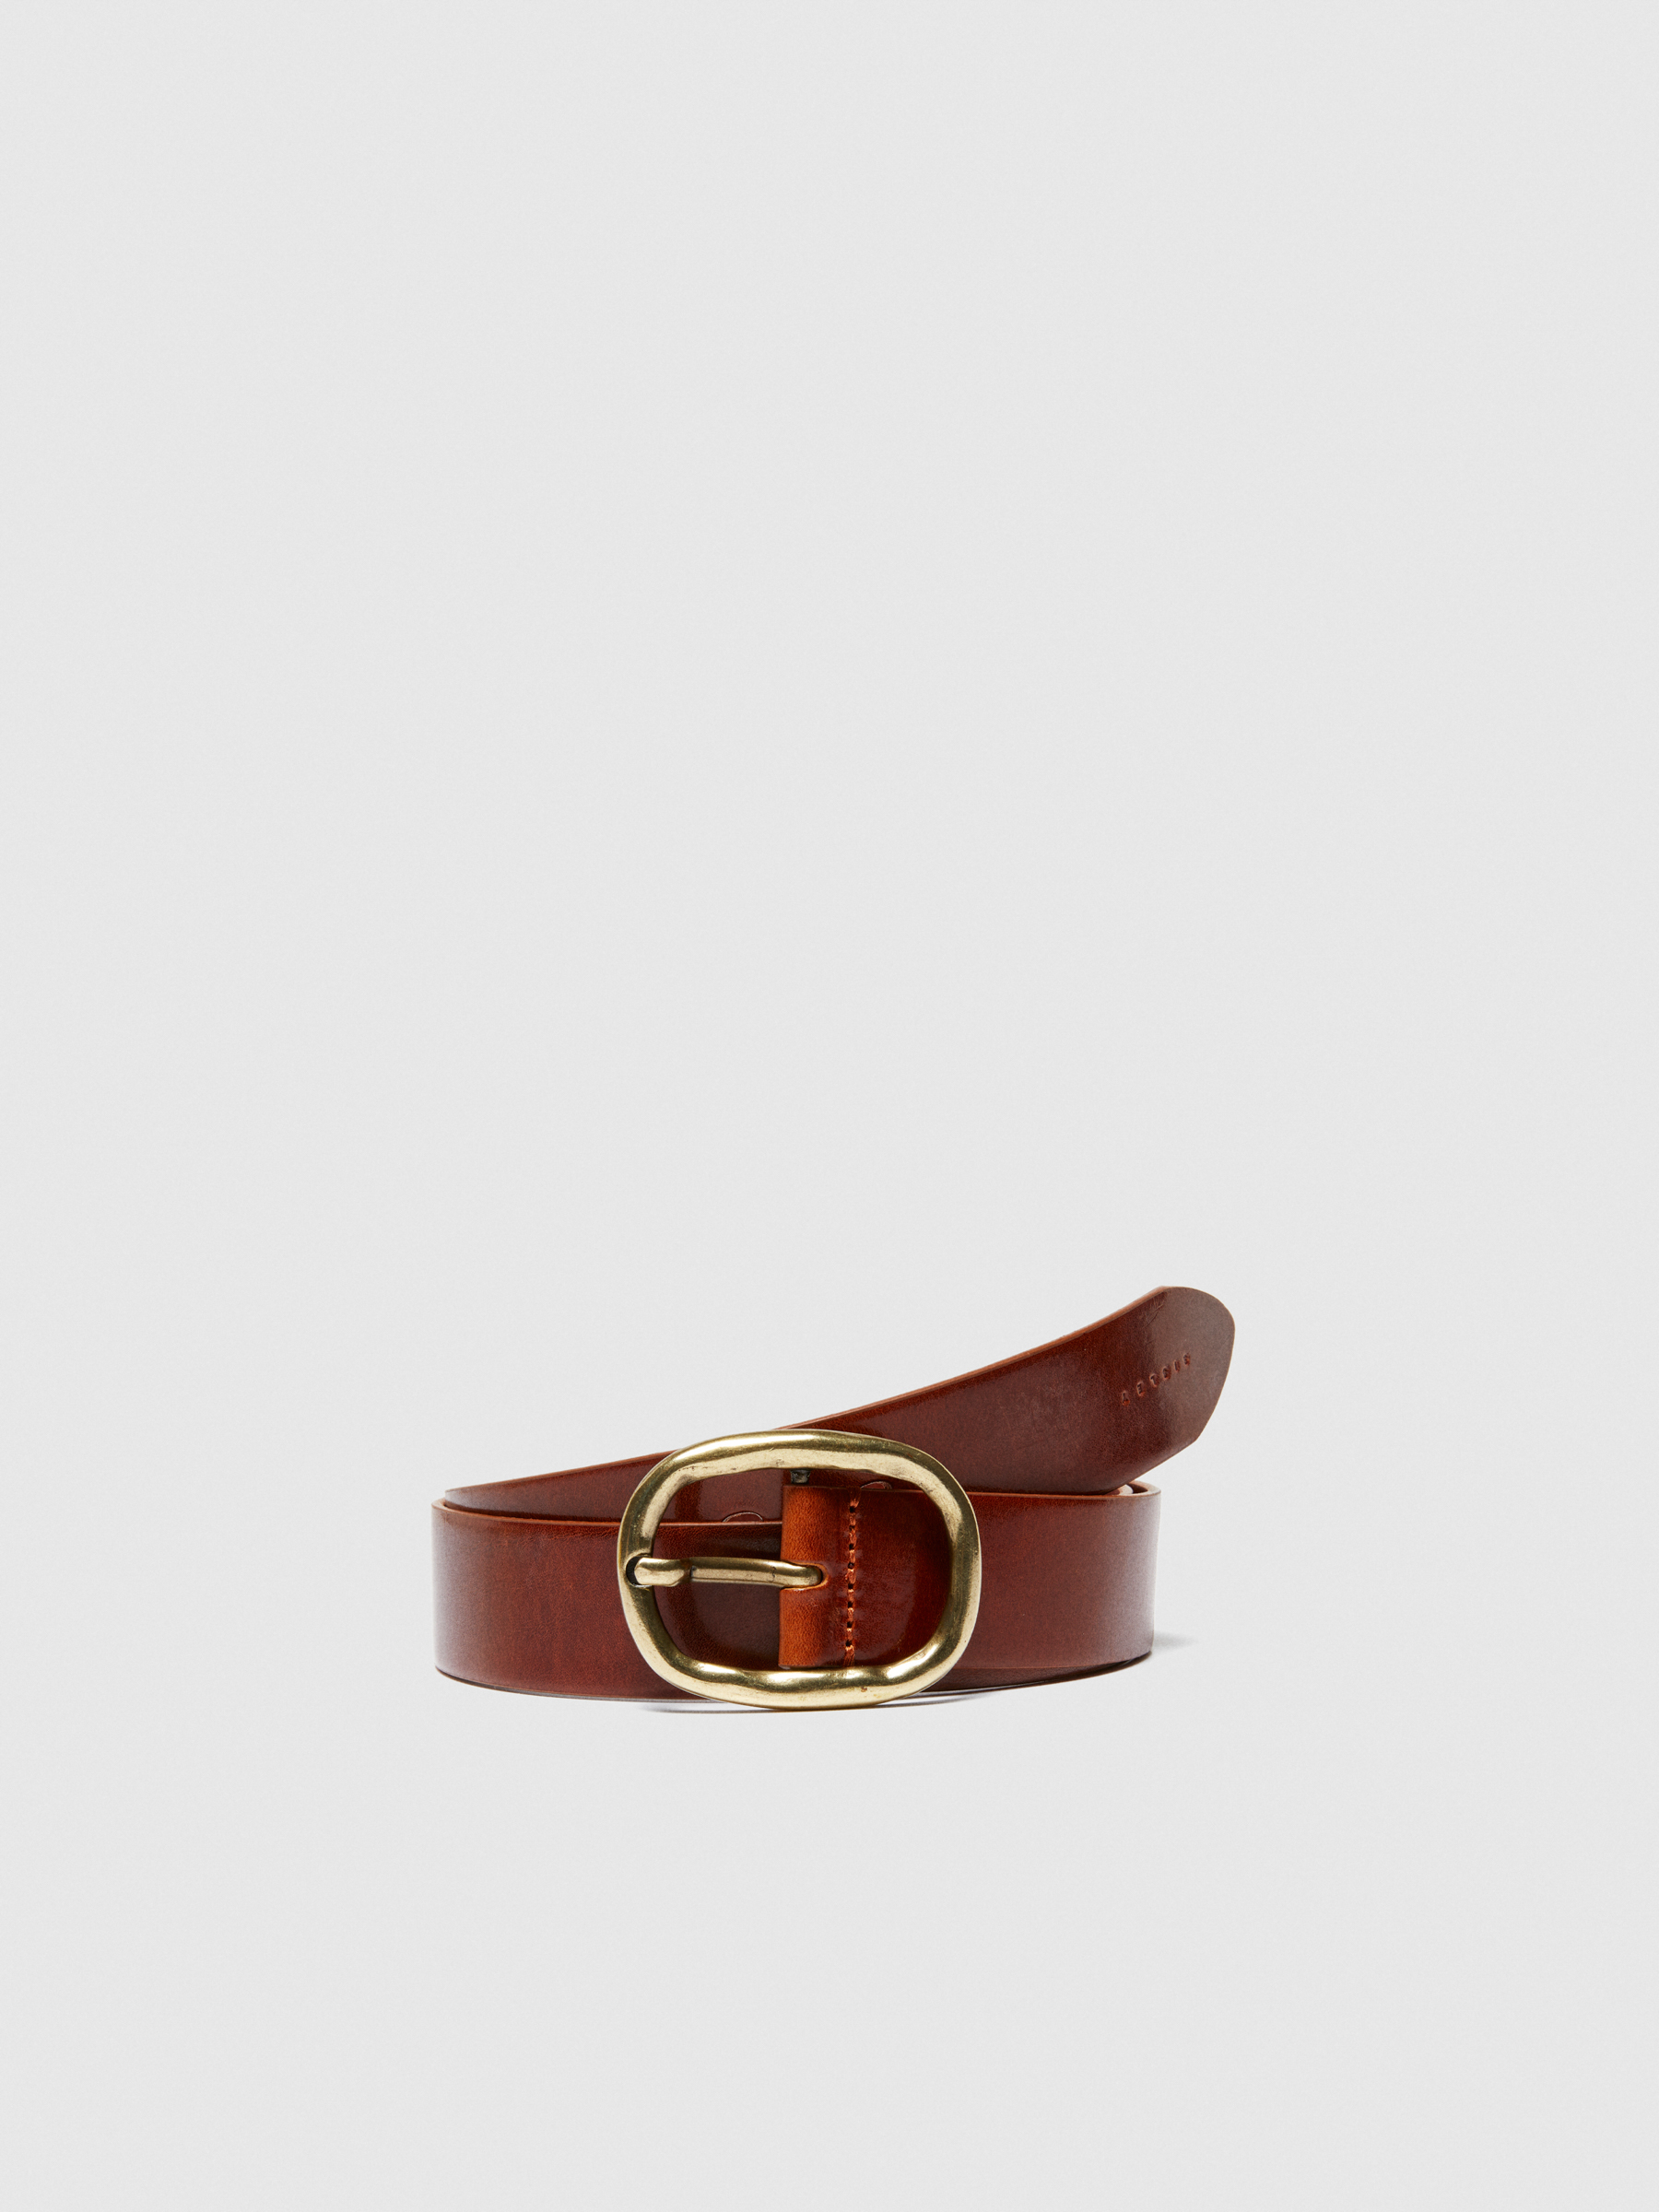 Sisley - Low-hanging Leather Belt, Woman, Camel, Size: M